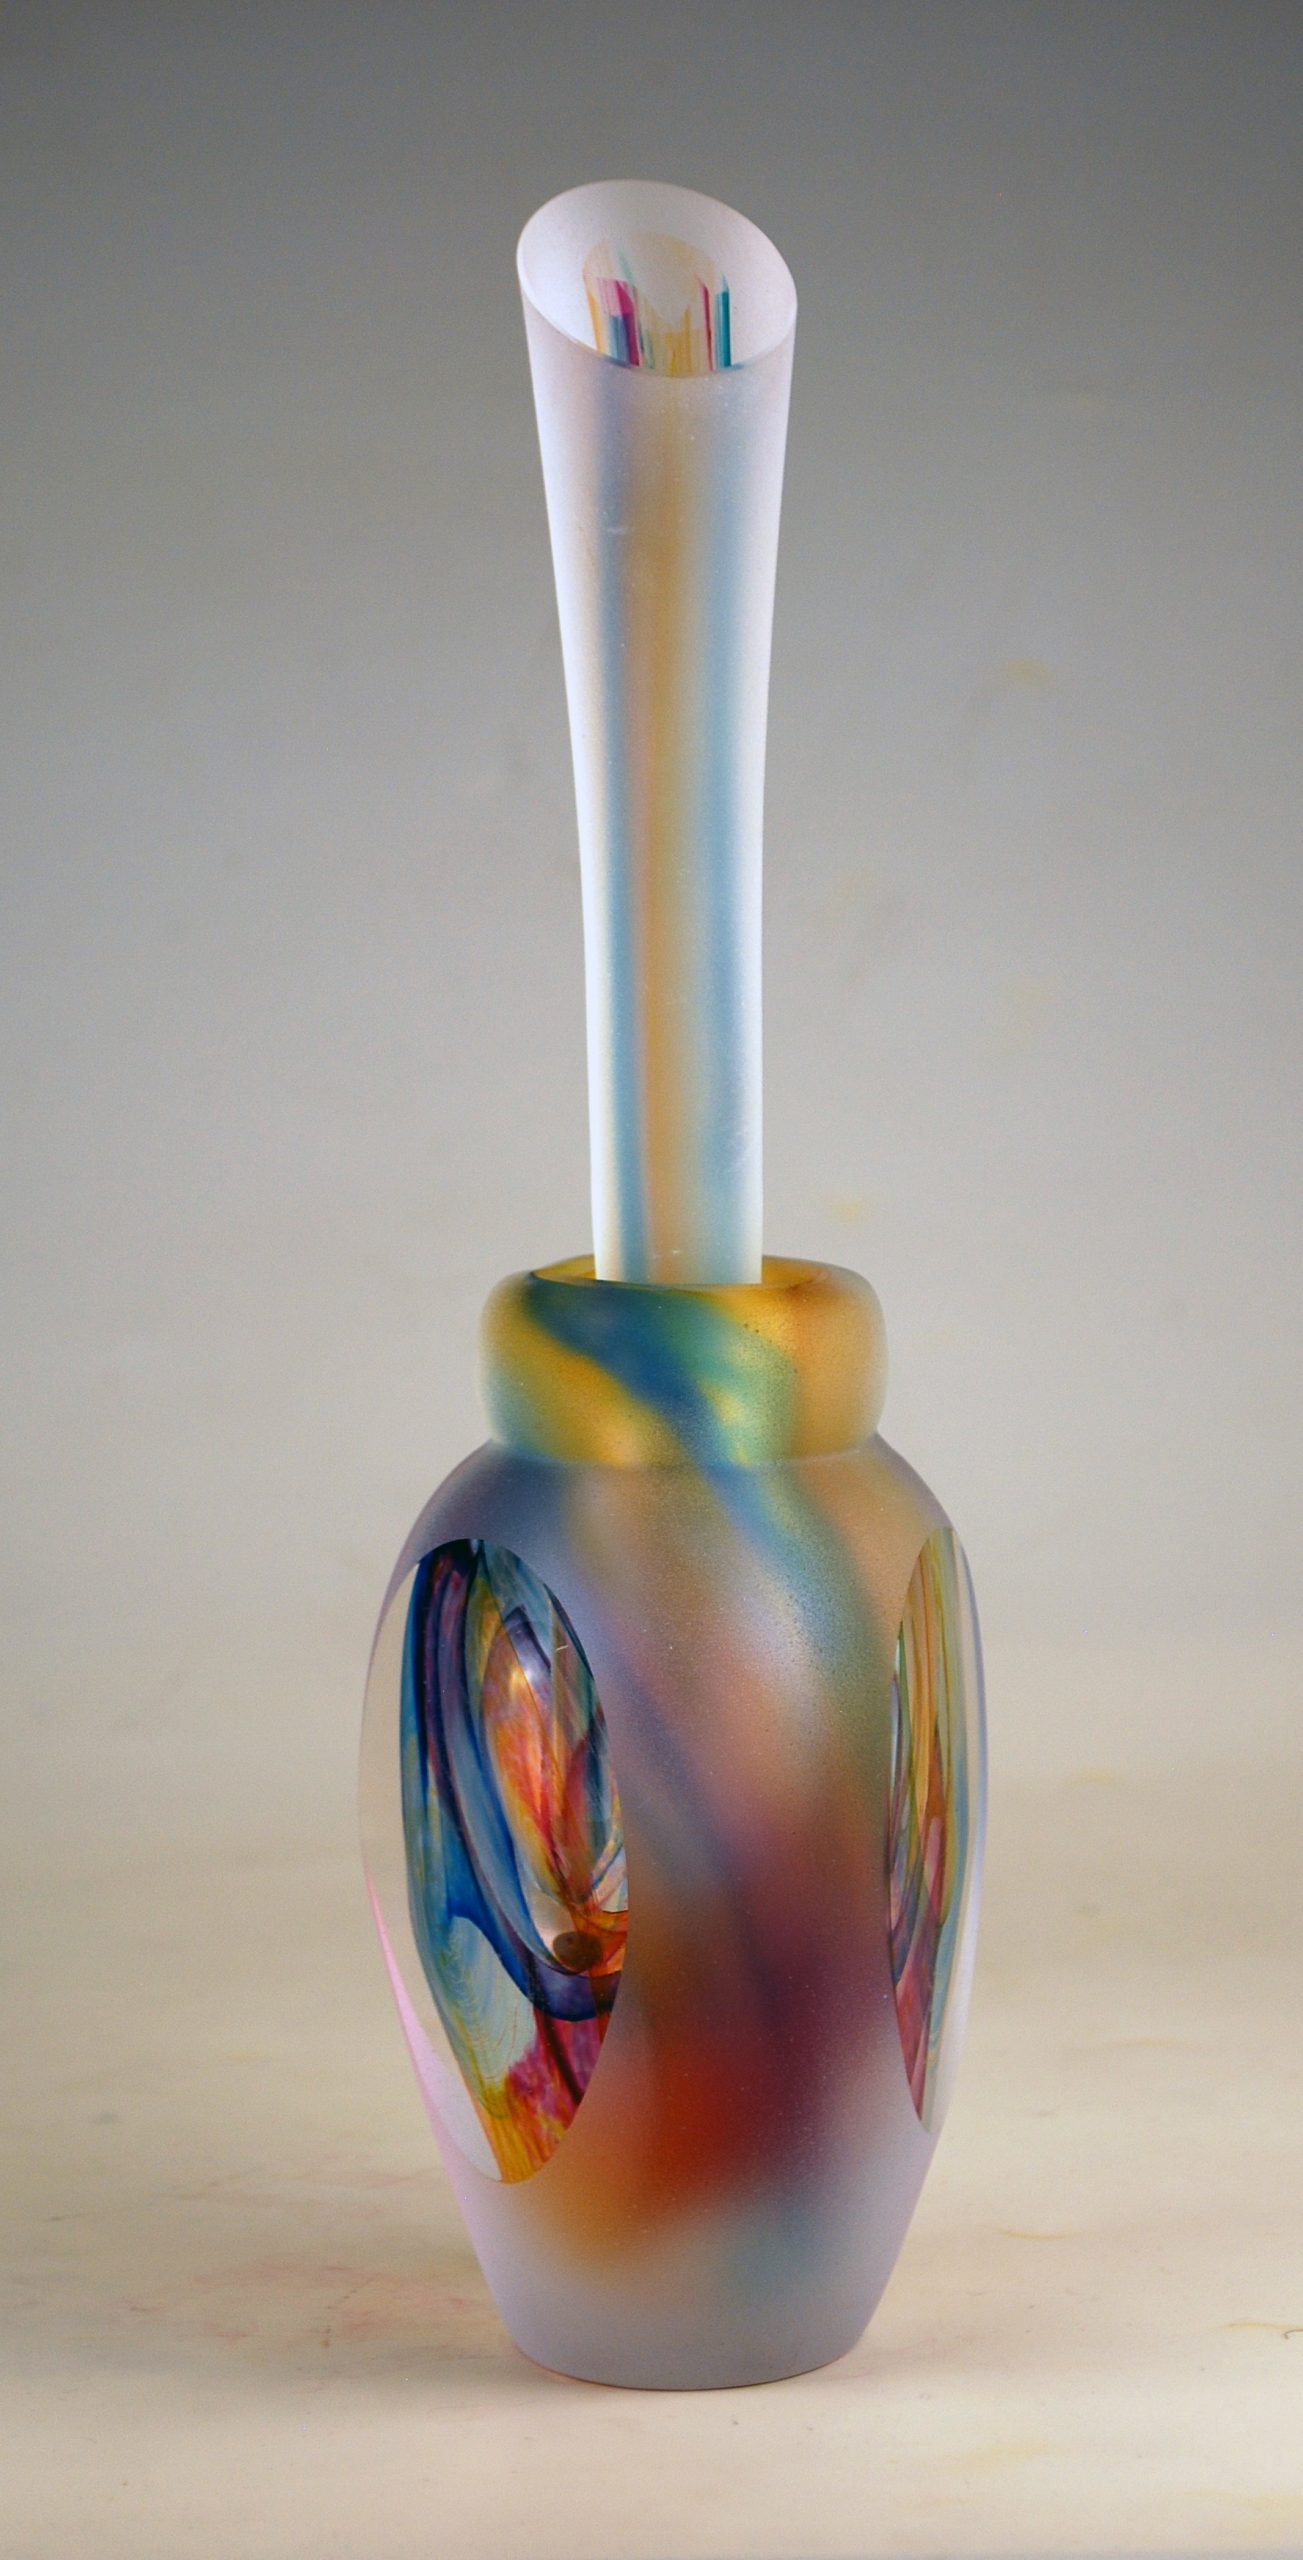 Andrew Shea, Multi-Color Swirl Perfume Bottle with Drop Stopper, 2020, blown glass, 10.75x3.25x3.25 inches, collection of the artist